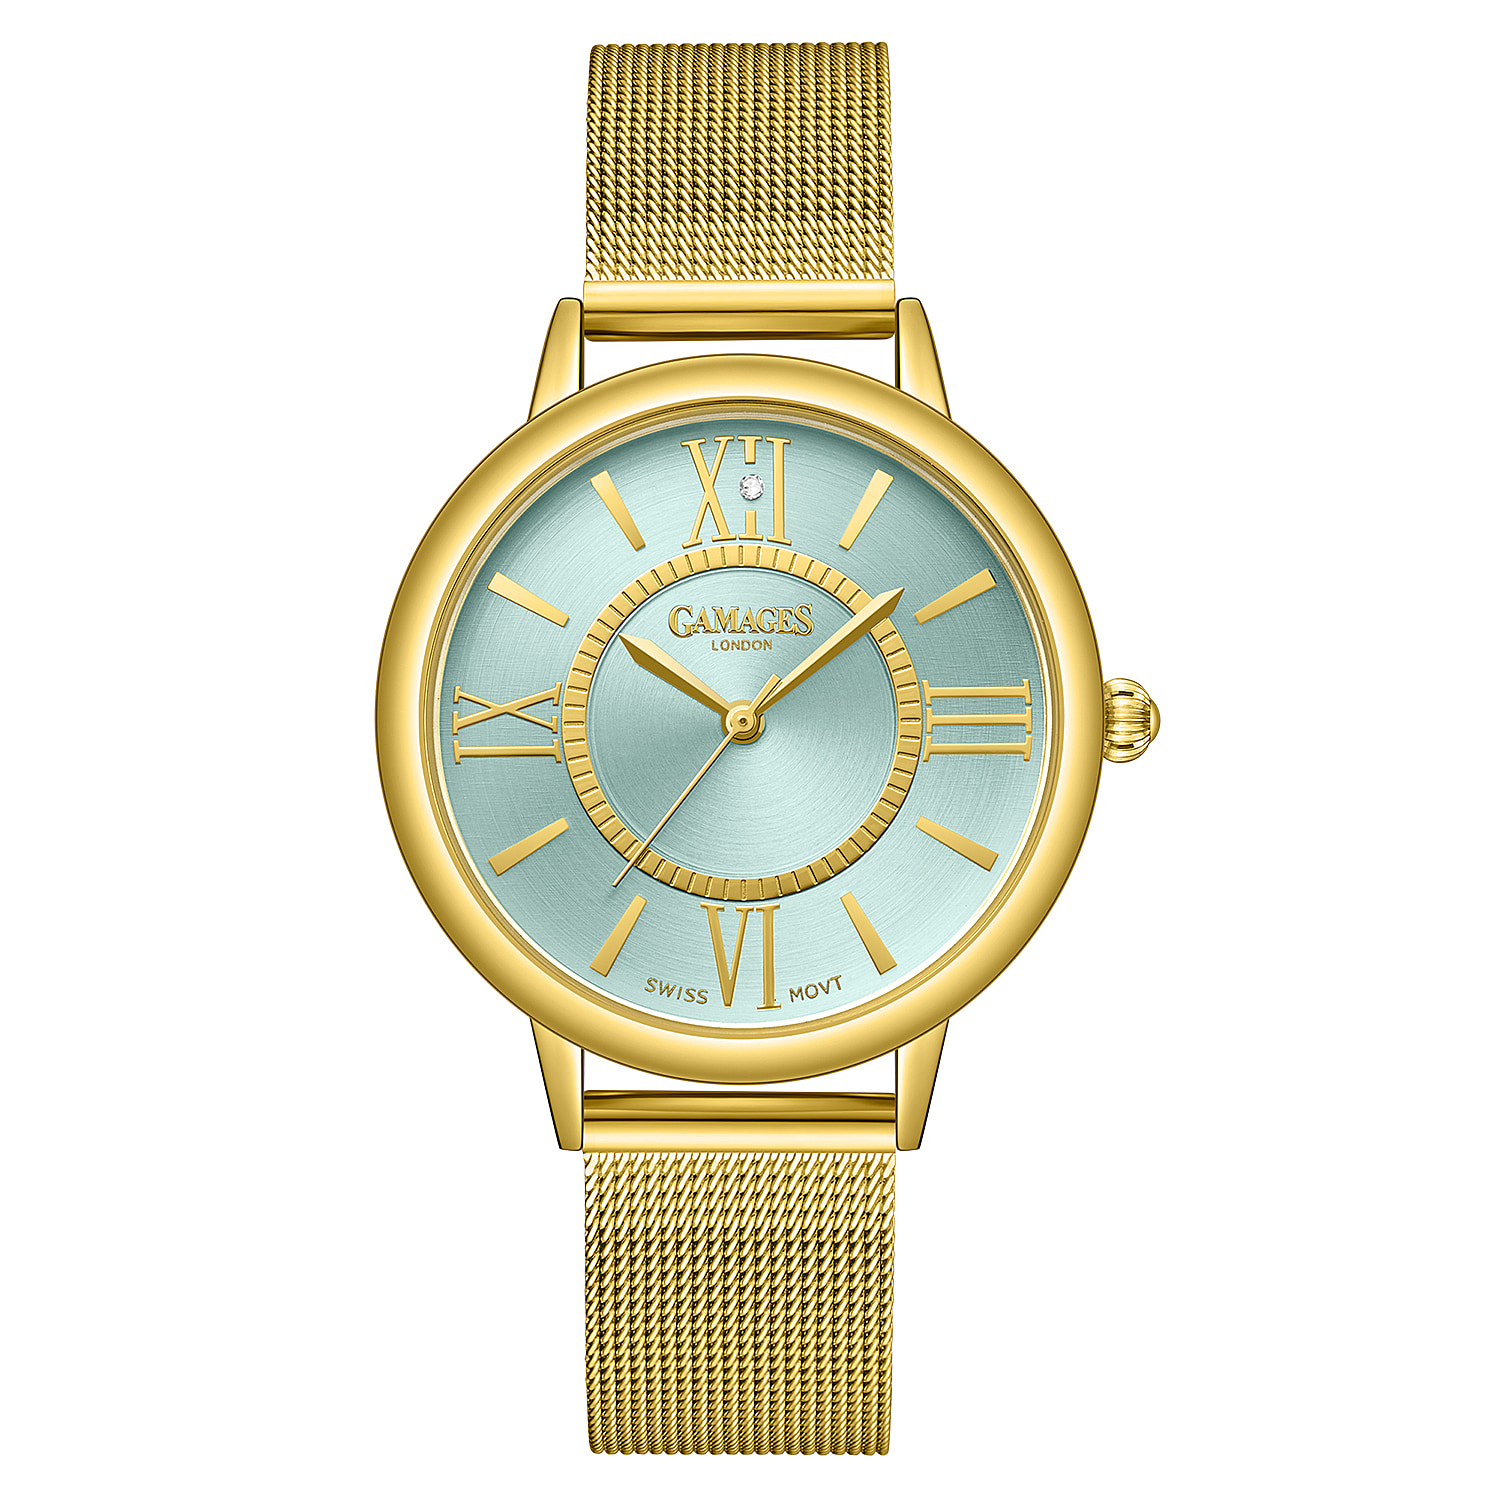 Gamages Of London Ladies Baroness Swiss Quartz Movement Teal Dial Diamond Stud Water Resistant Watch with Gold Mesh Bracelet